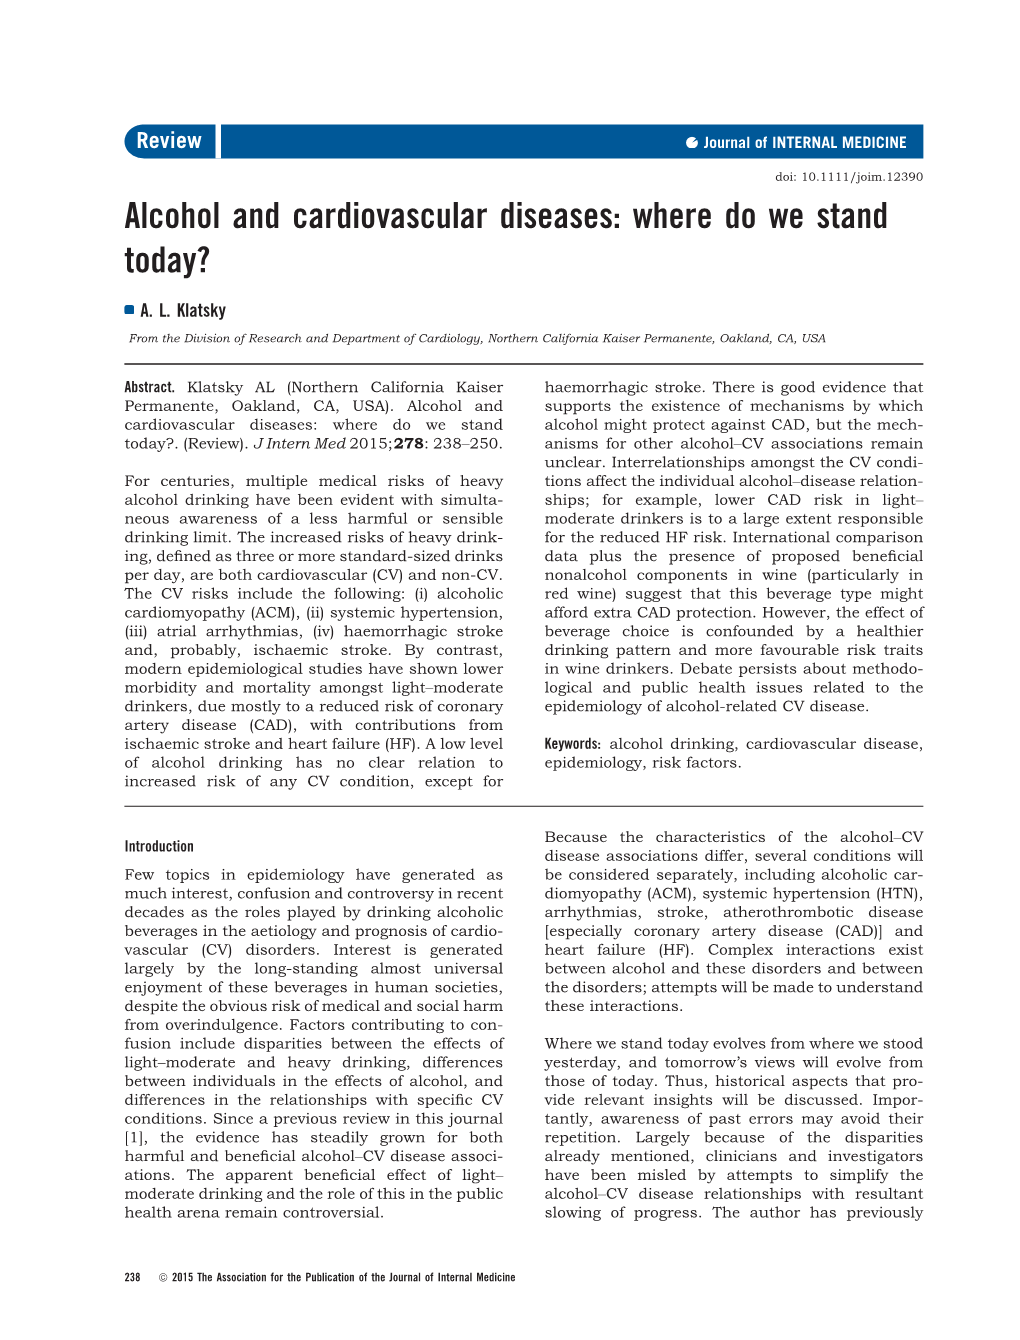 Alcohol and Cardiovascular Diseases: Where Do We Stand Today?